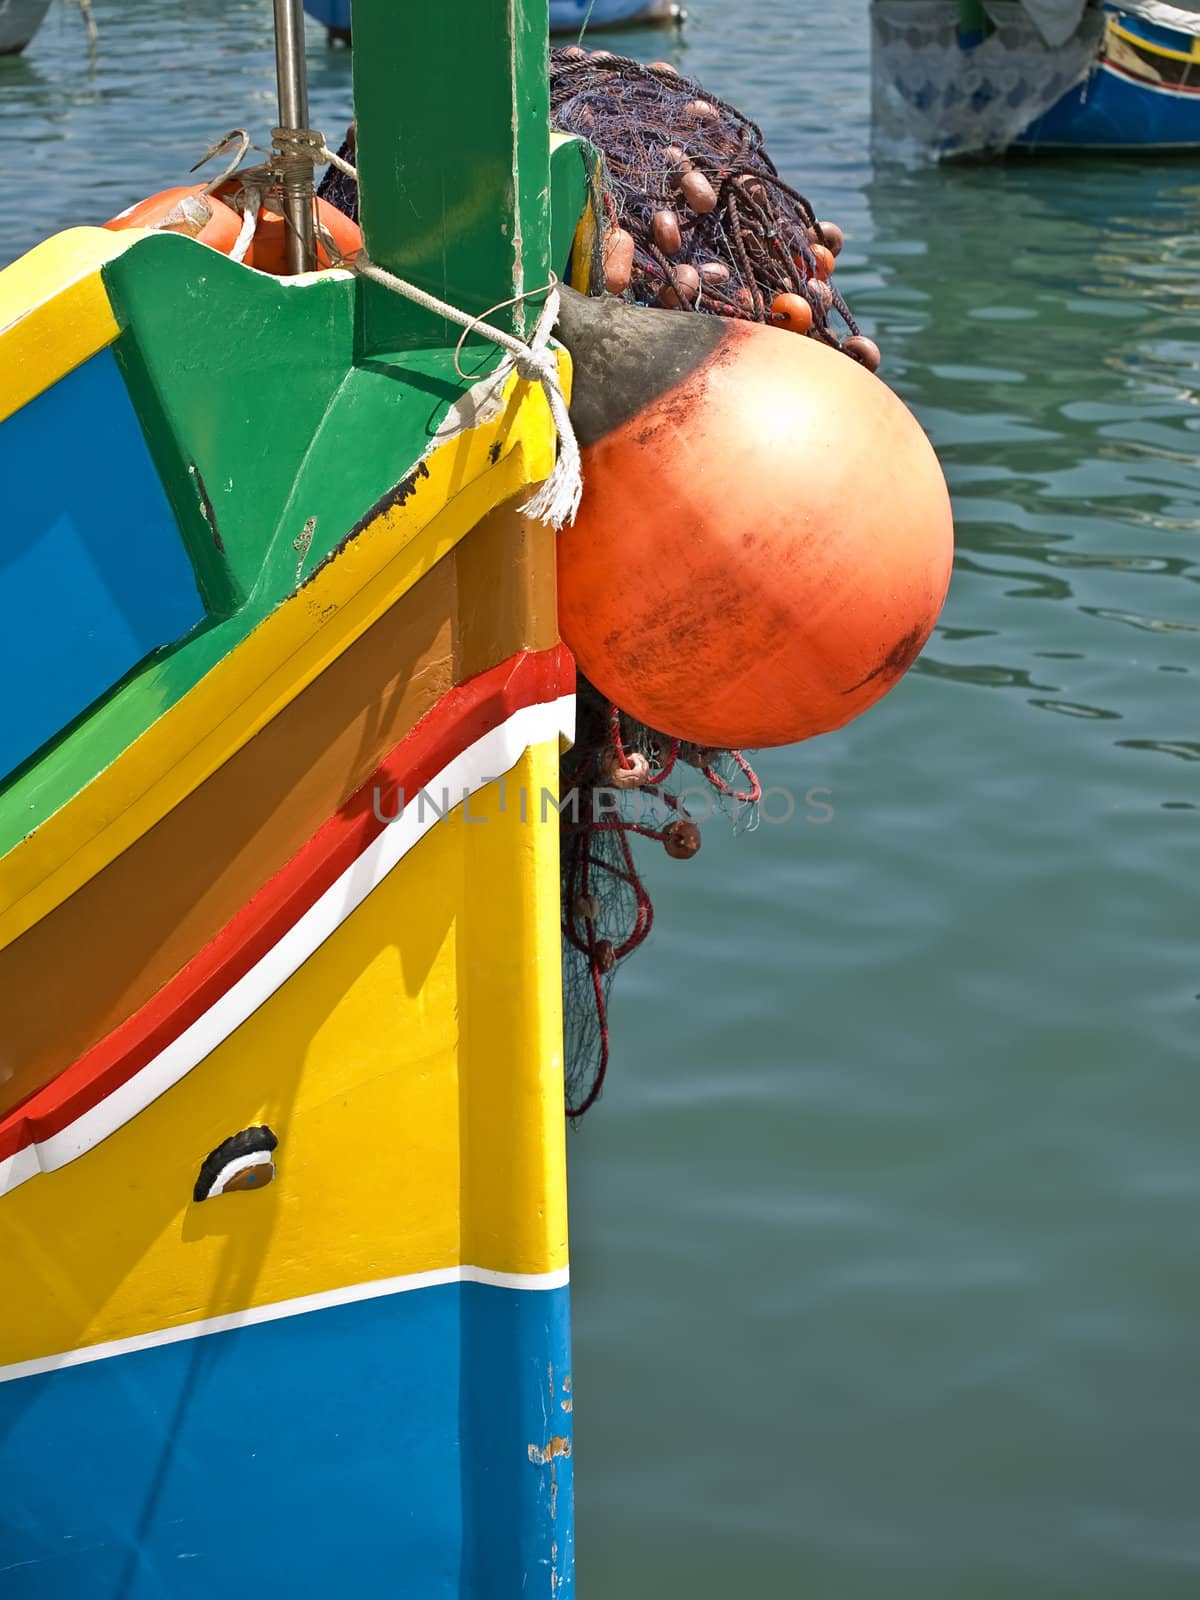 Traditional fishing boats of Malta called Luzzu or Dghajsa in the fishing village of Marsaxlokk